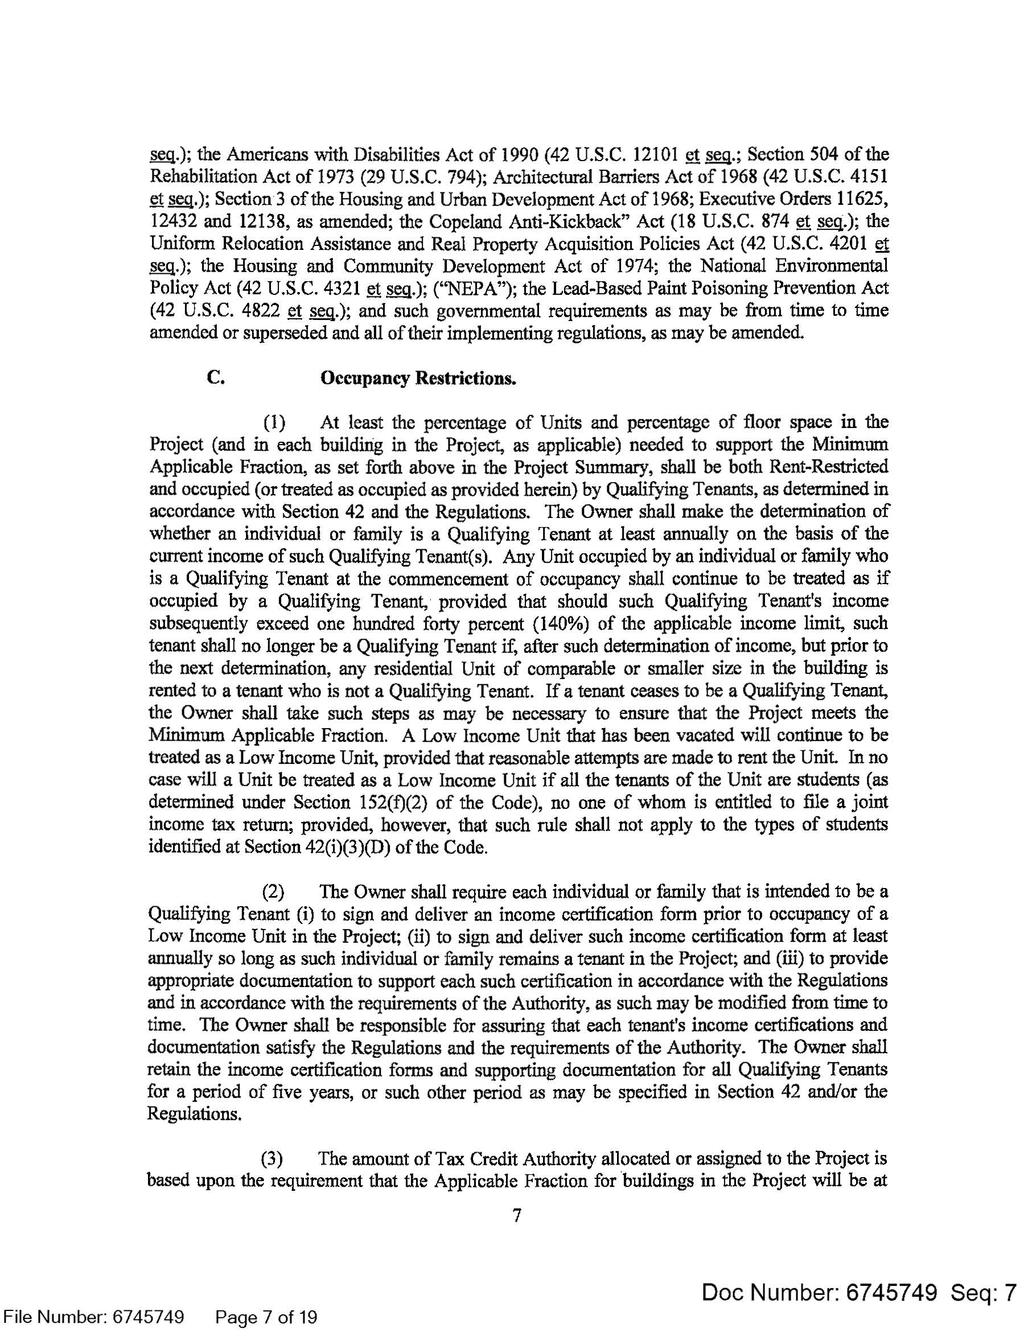 Case: 1:14-cv-03197 Document #: 1-1 Filed: 05/01/14 Page 21 of 29 PageID #:66 seq.); the Americans with Disabilities Act of 1990 (42 U.S.C. 12101 et seq.